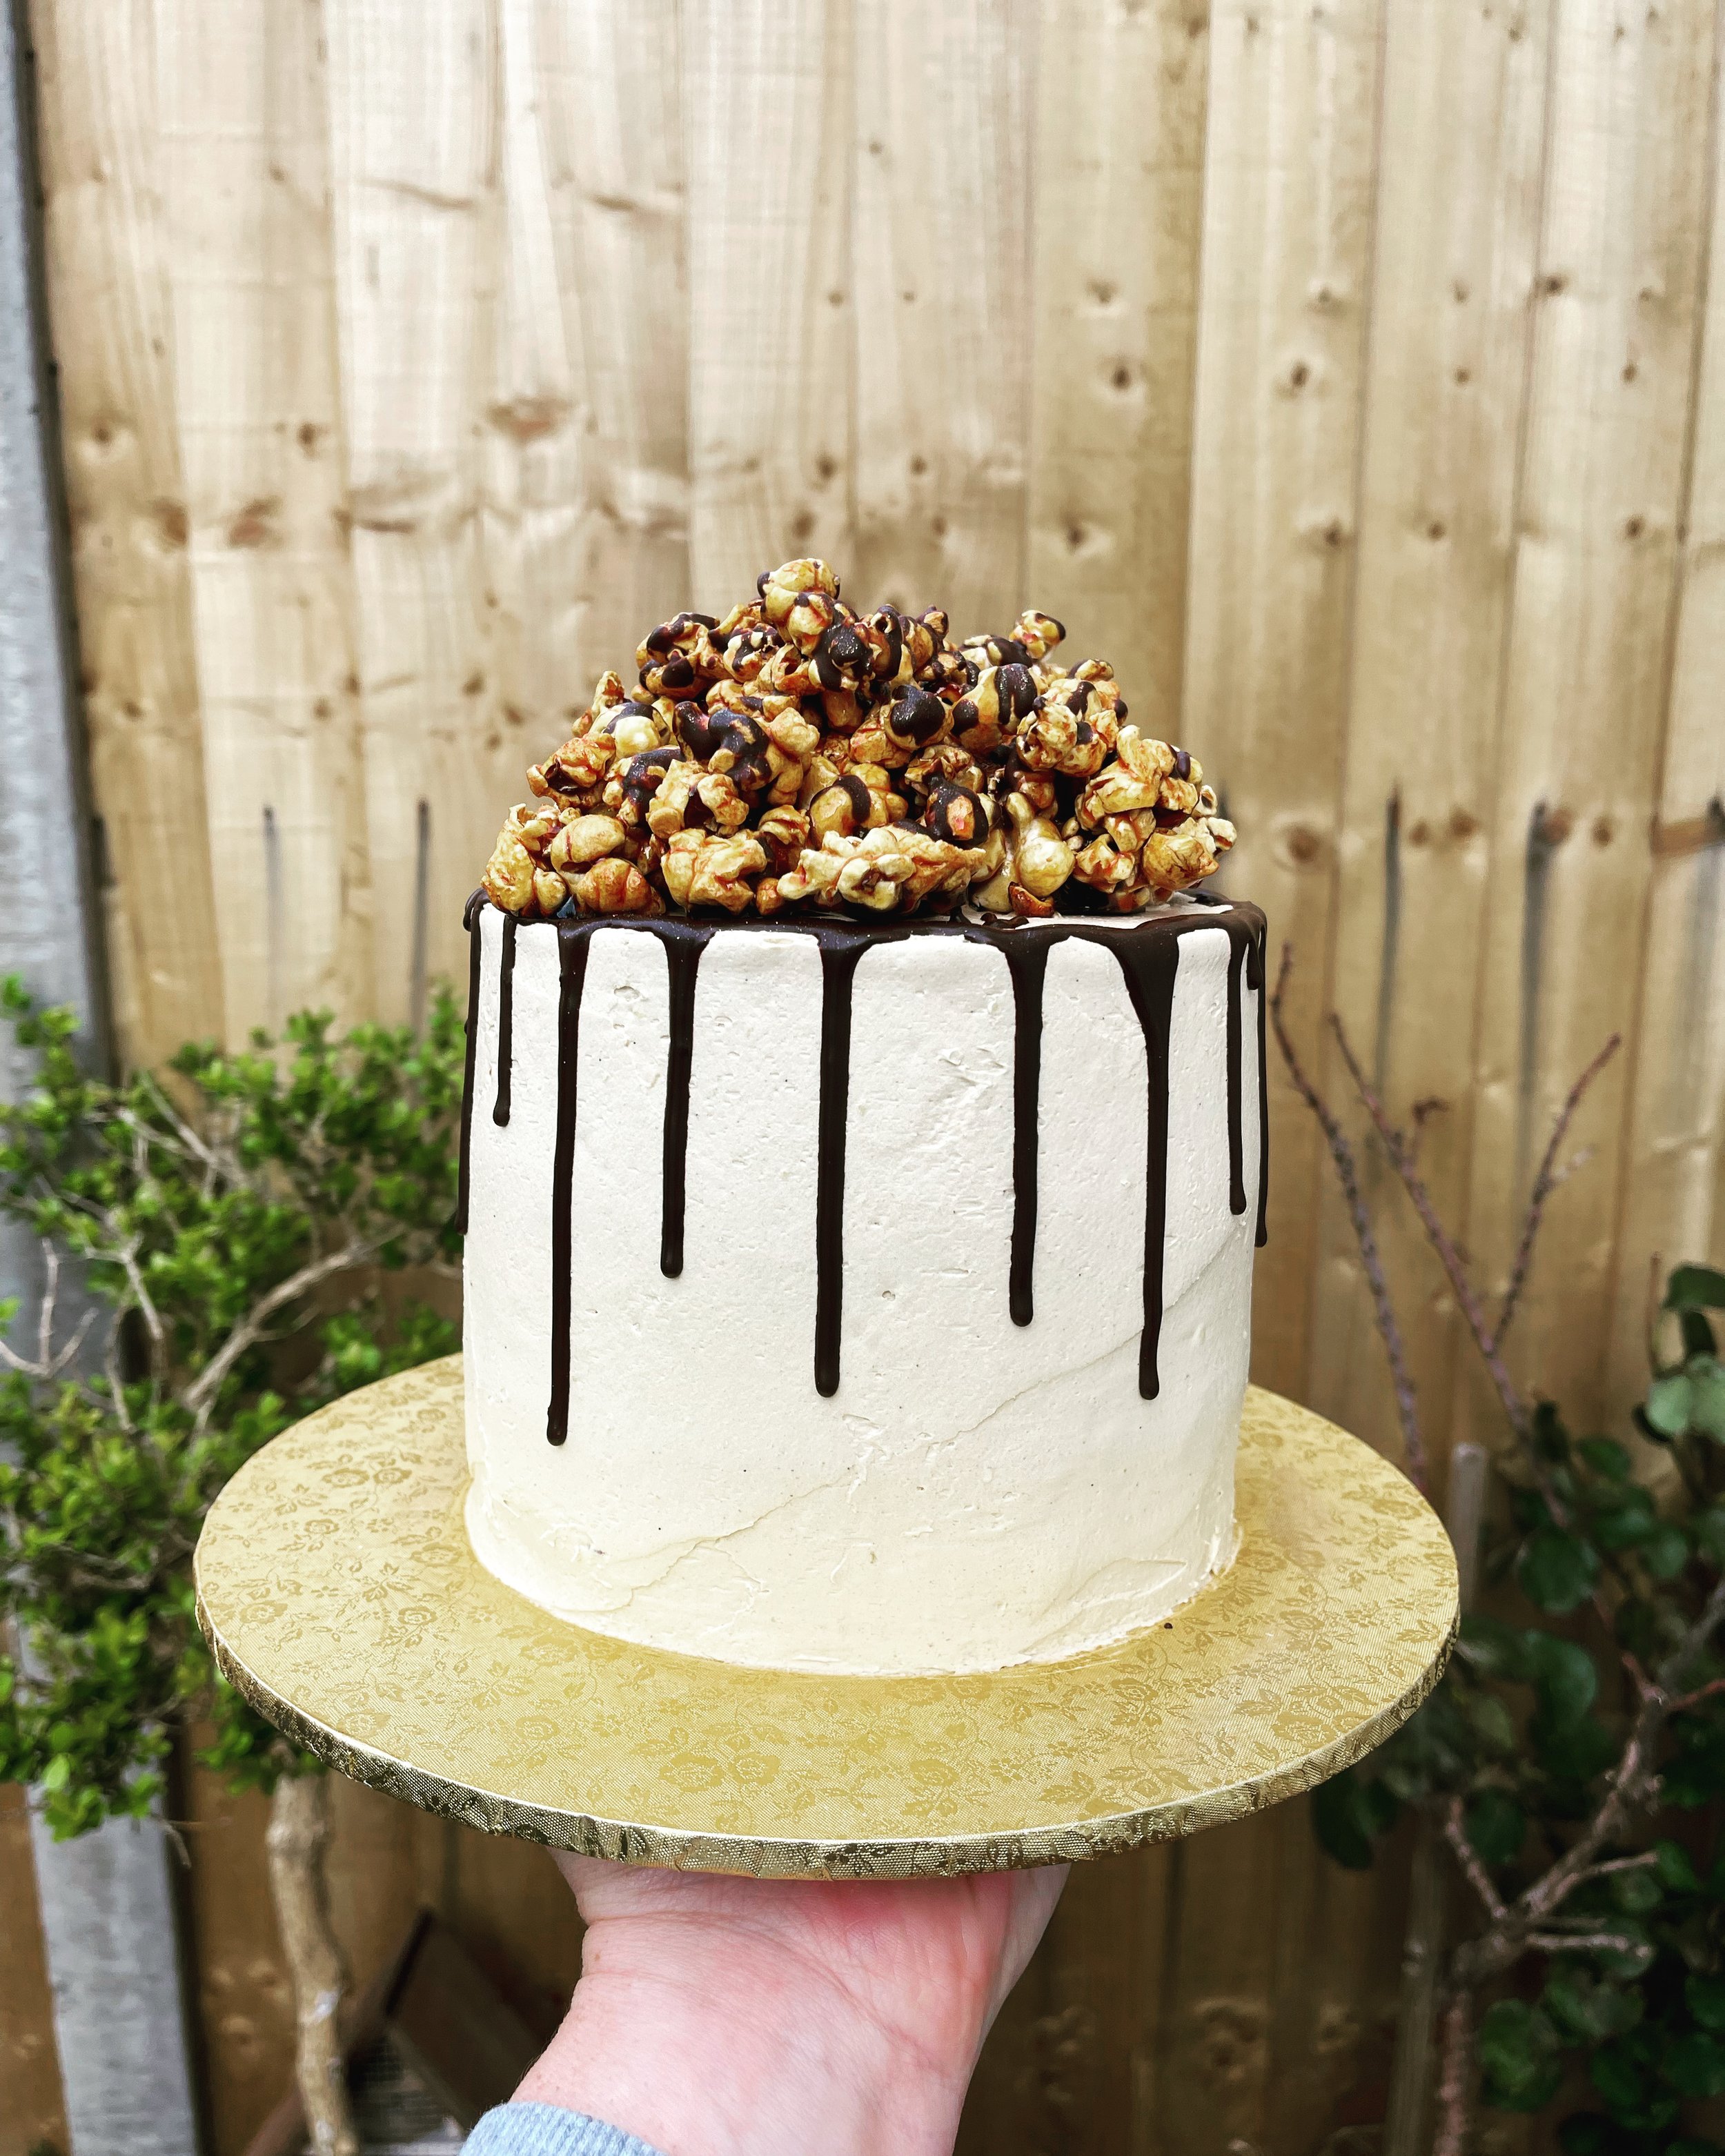 Black and gold two tier with caramel popcorn, macarons, chocolate drip and  custom cake topper